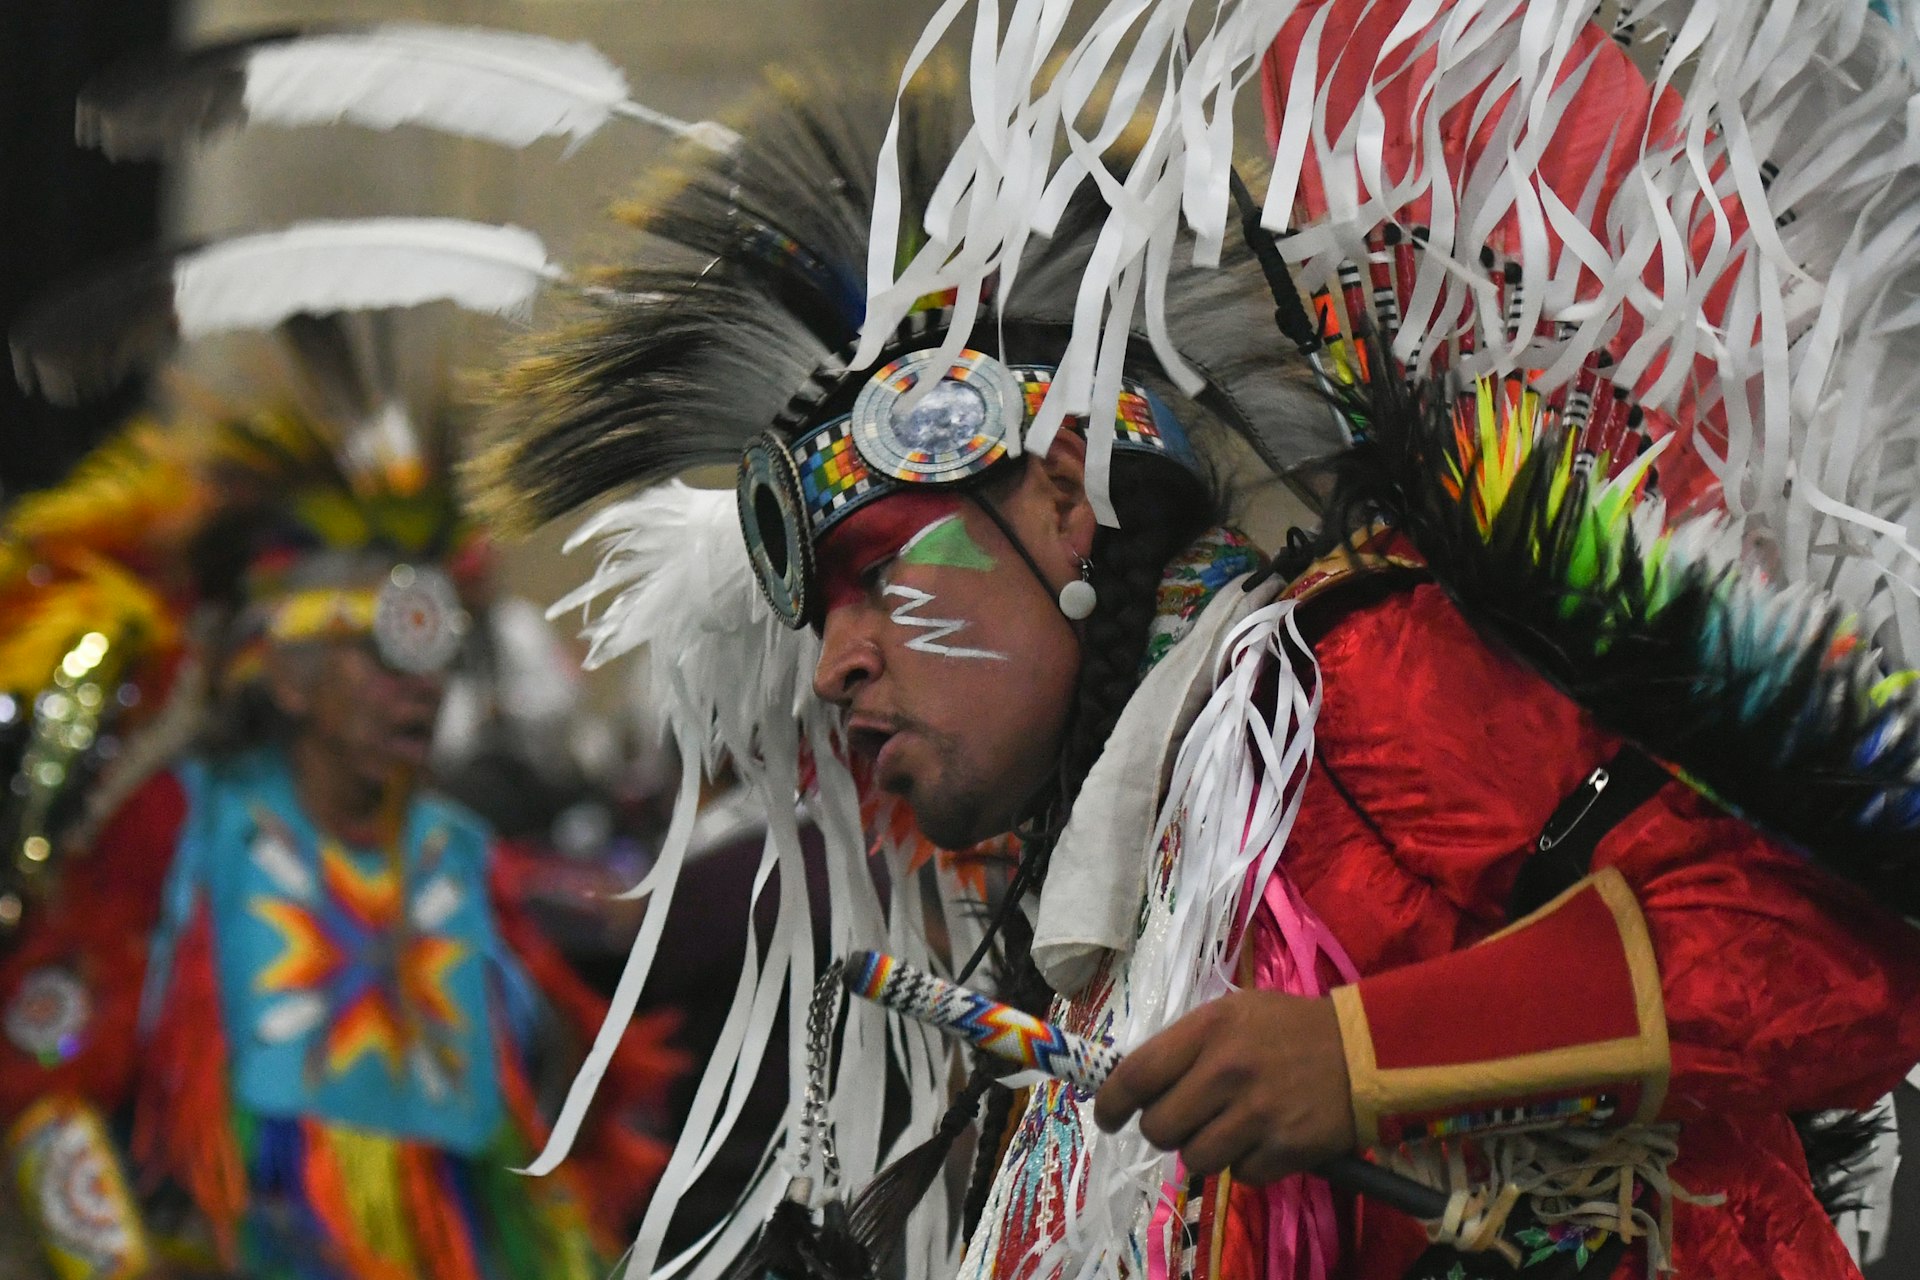 Members of the First Nations dance in regalia during the traditional Pow Wow competition, at the K-Days Festival in Edmonton